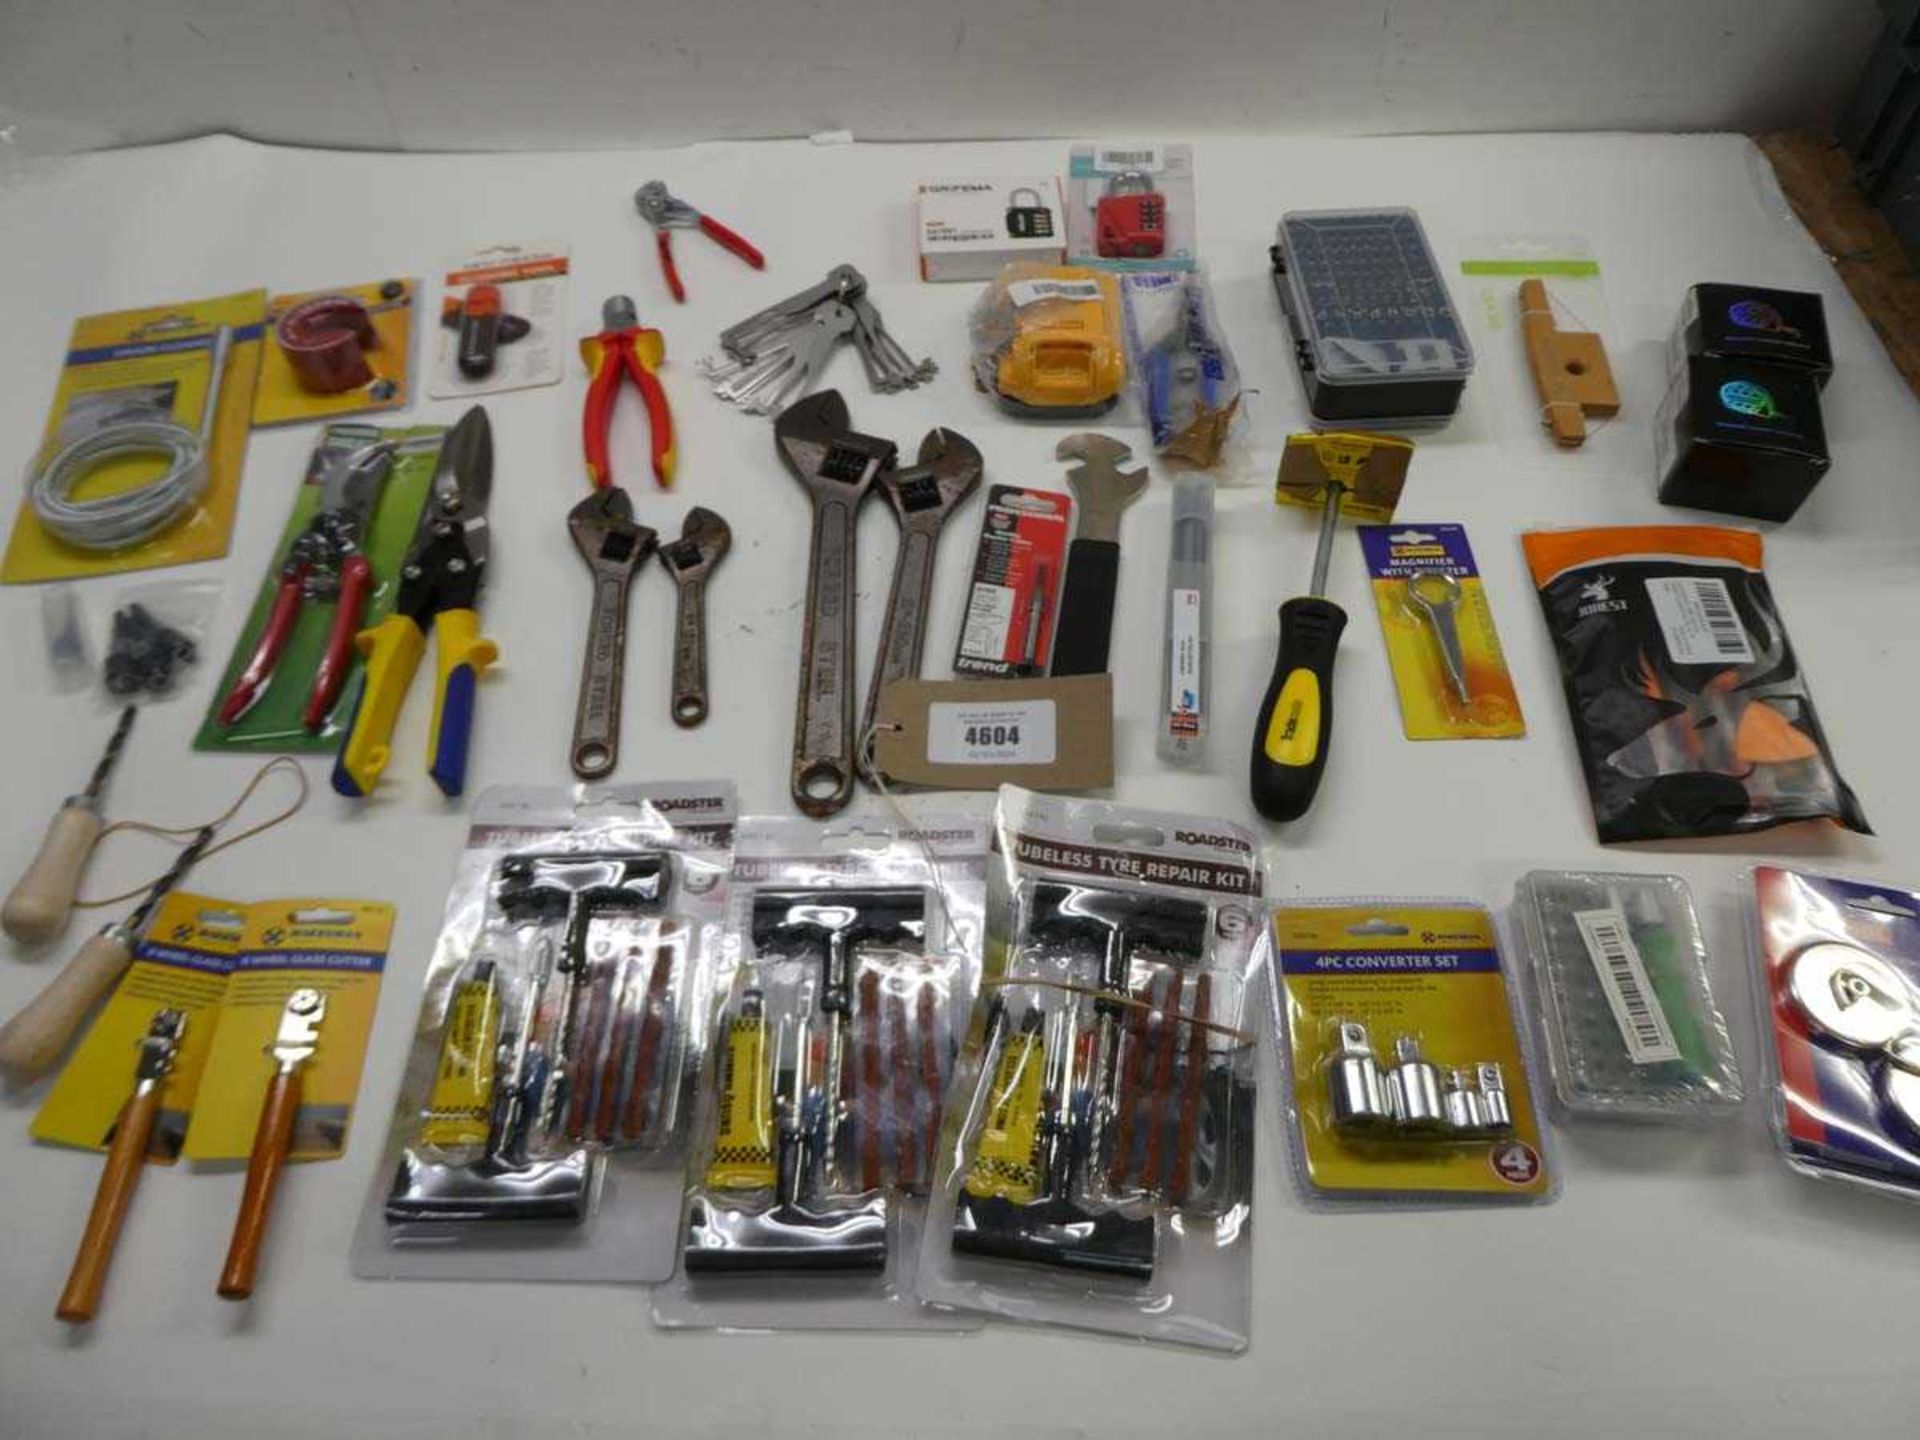 +VAT Tin snips, pliers. glass cutters, adjustable spanners, pipe cutters, multi tools, converter